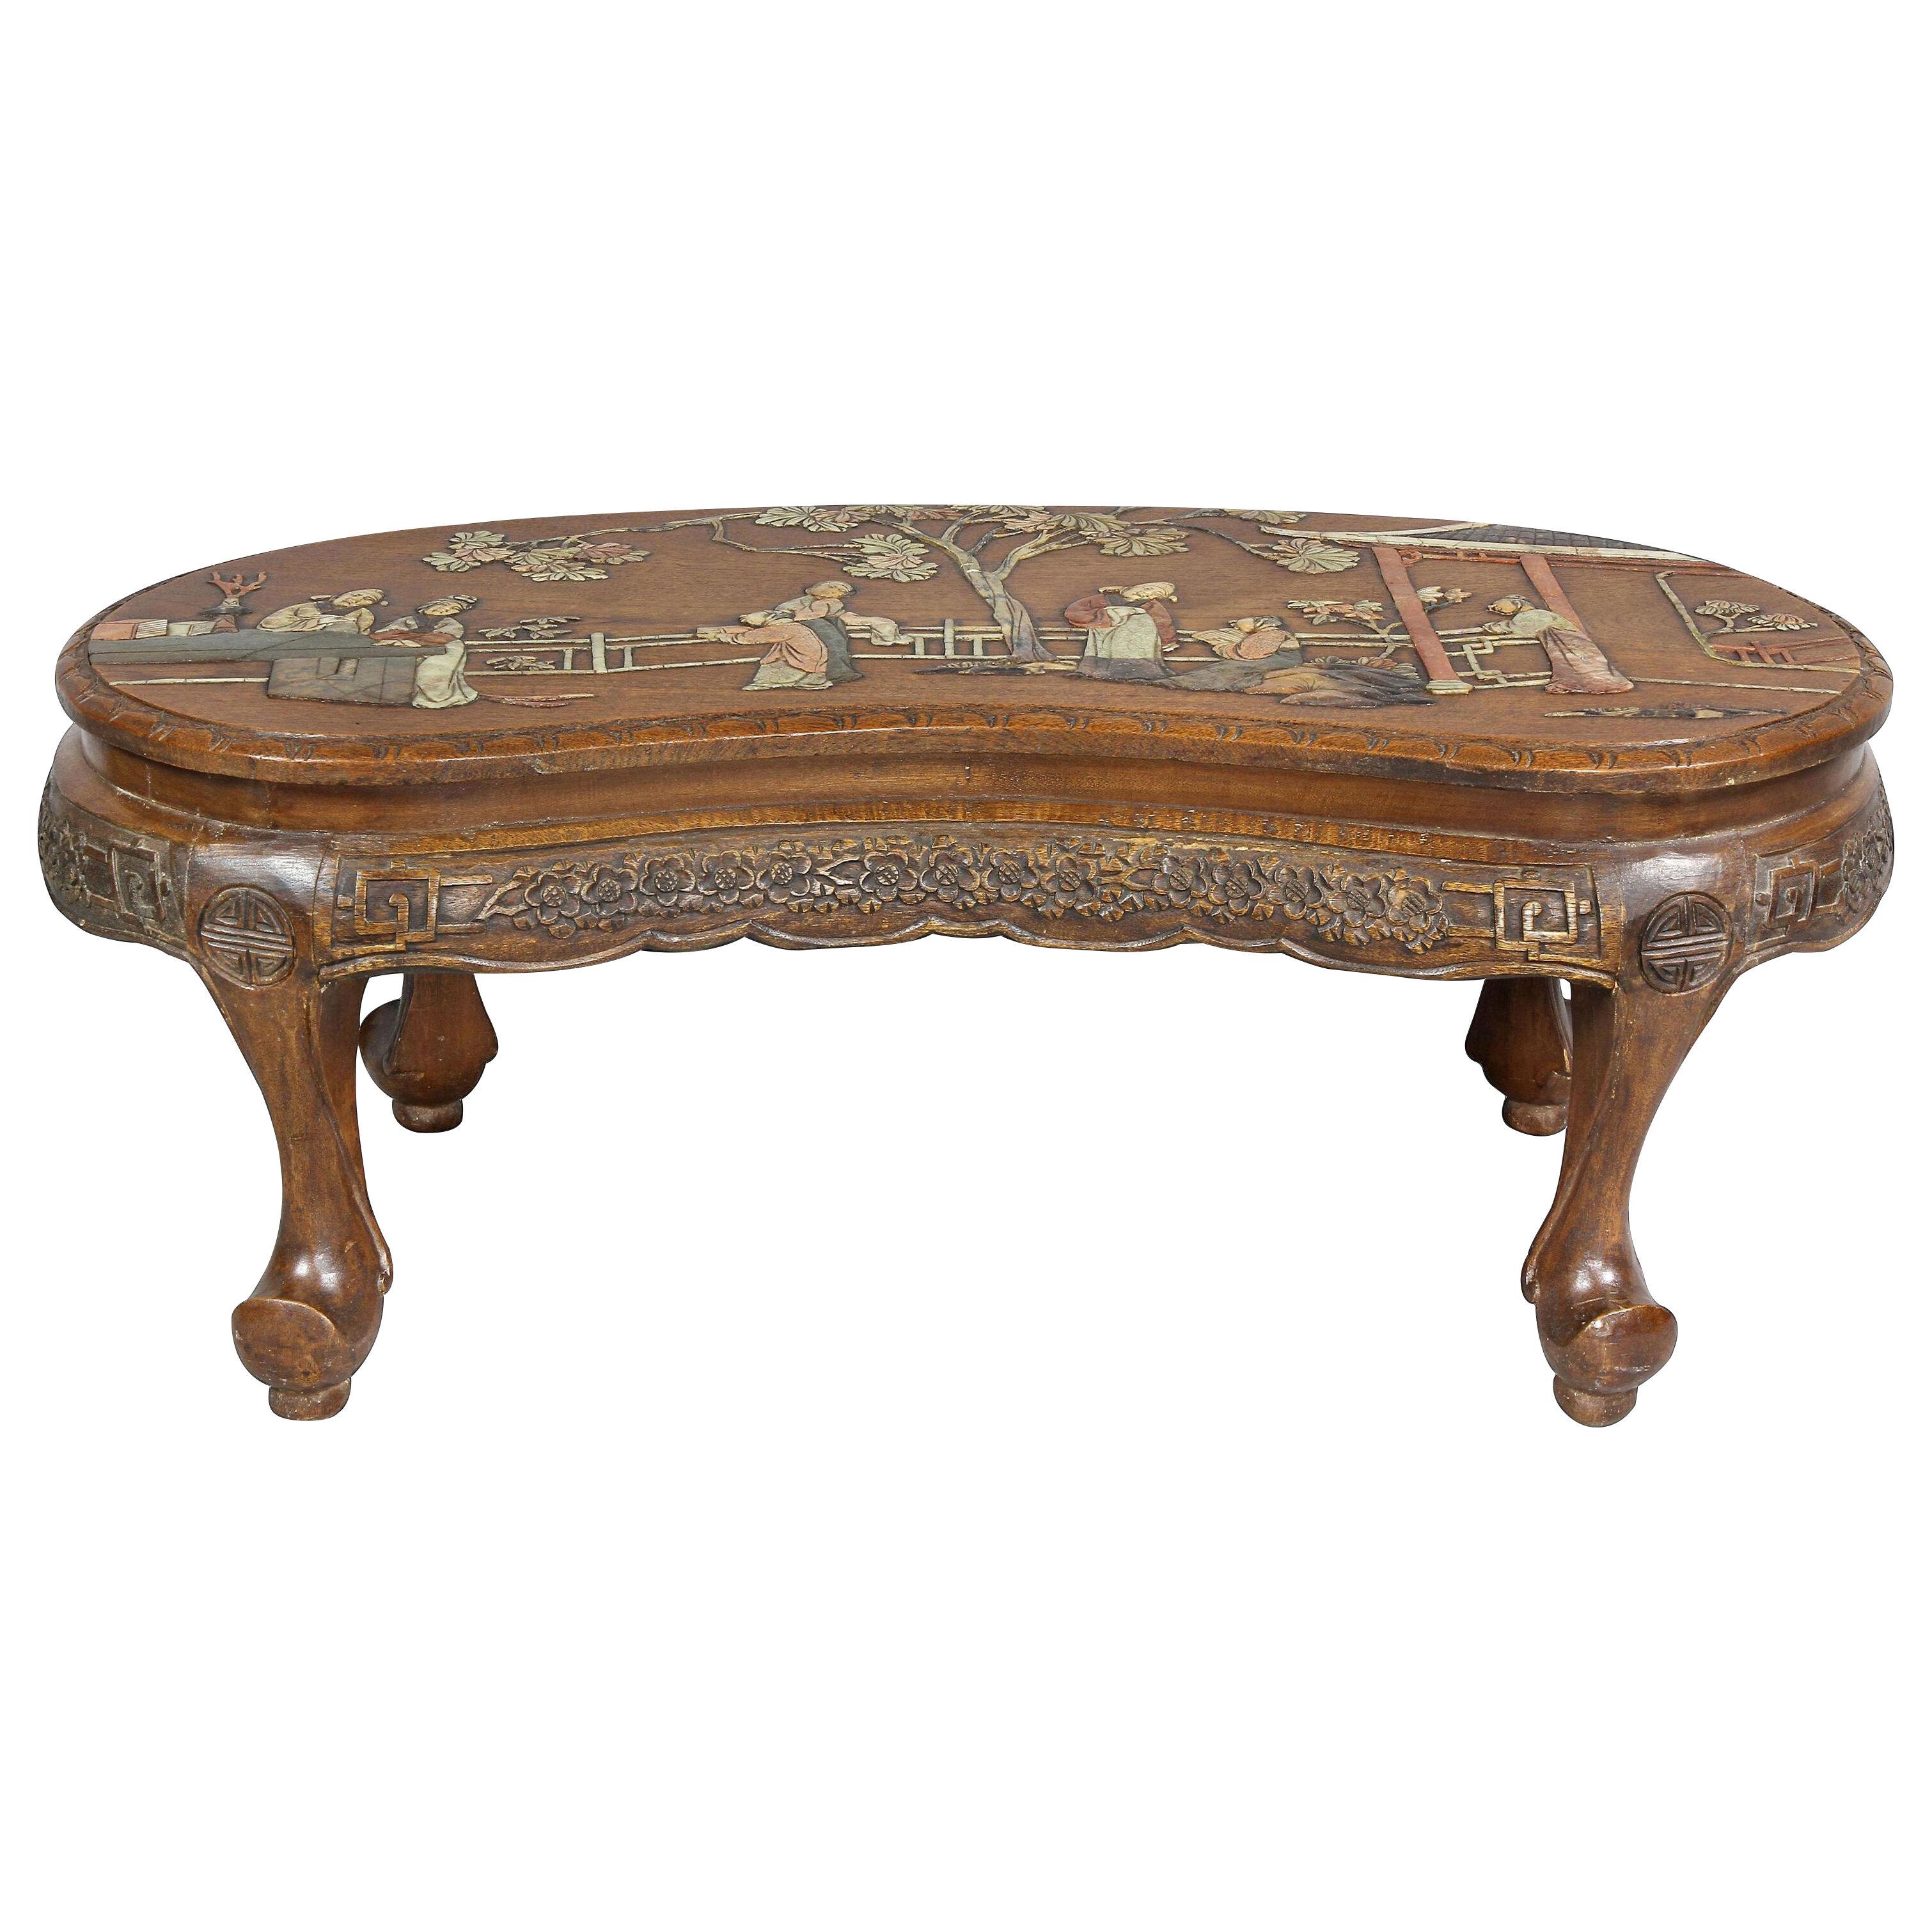 Chinese Hardstone Mounted Coffee Table